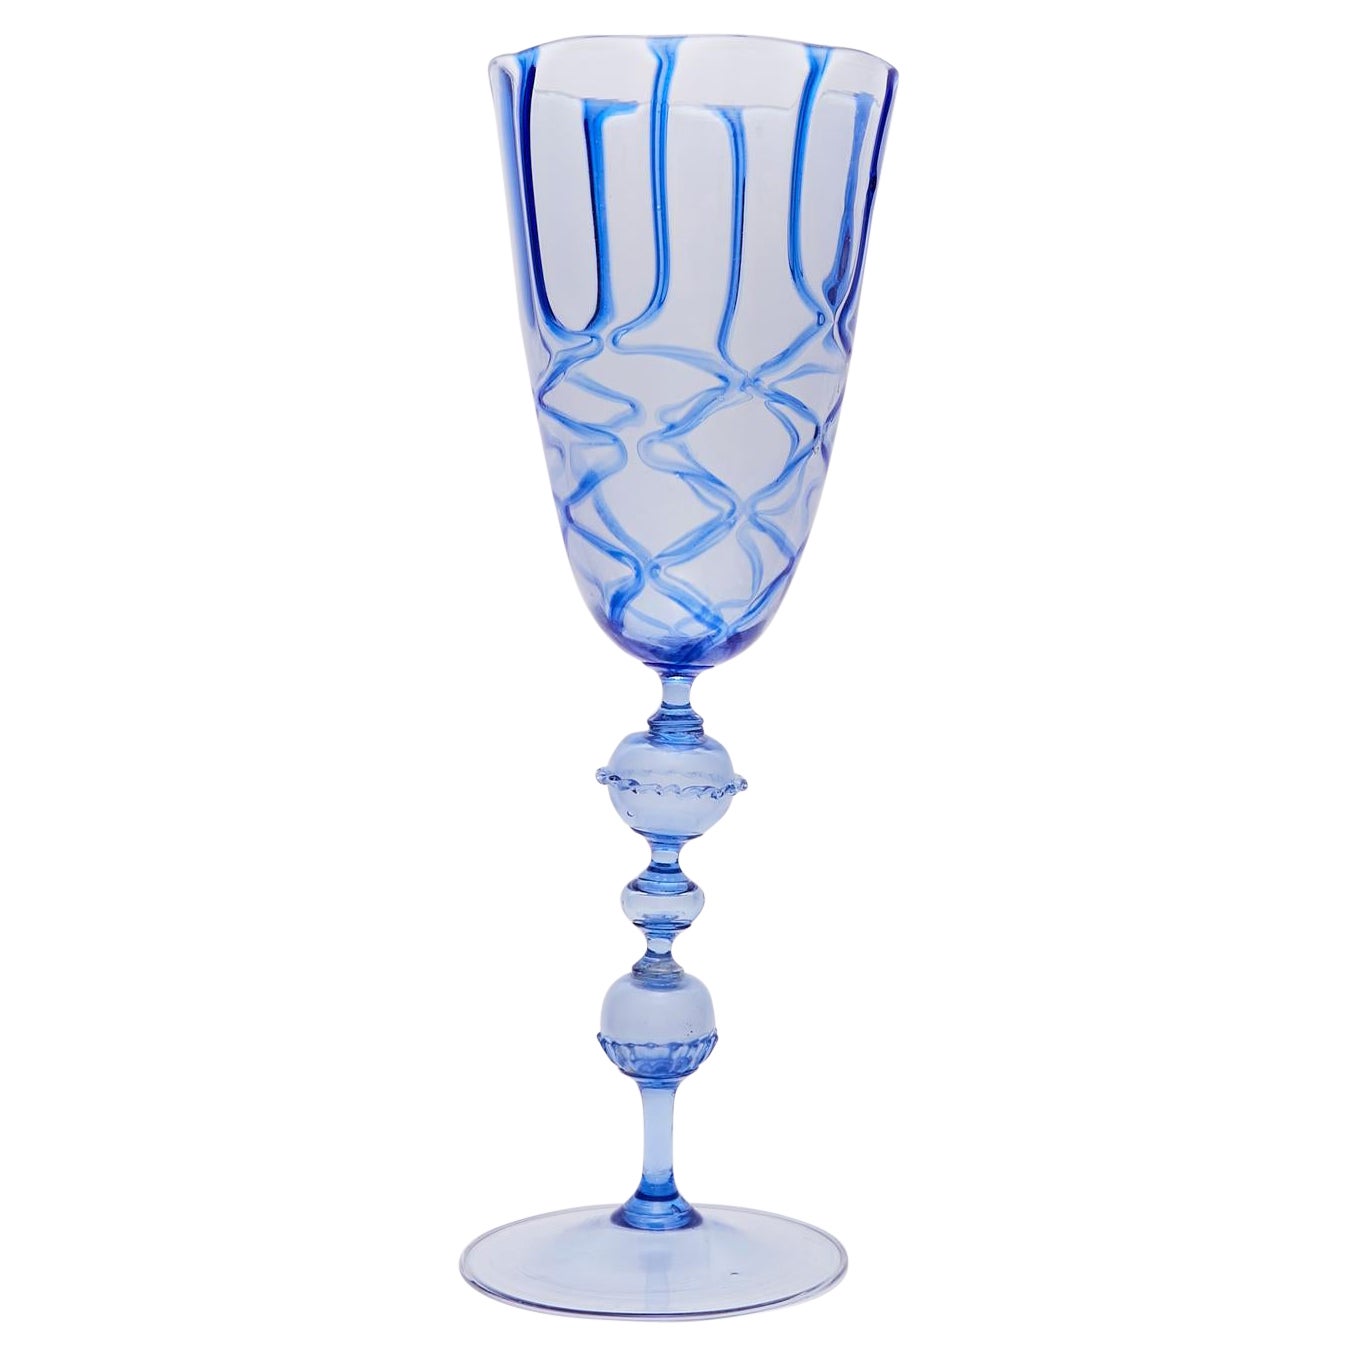 Large Chalice with Blue Decoration by Artistica Barovier, 1920's Italy